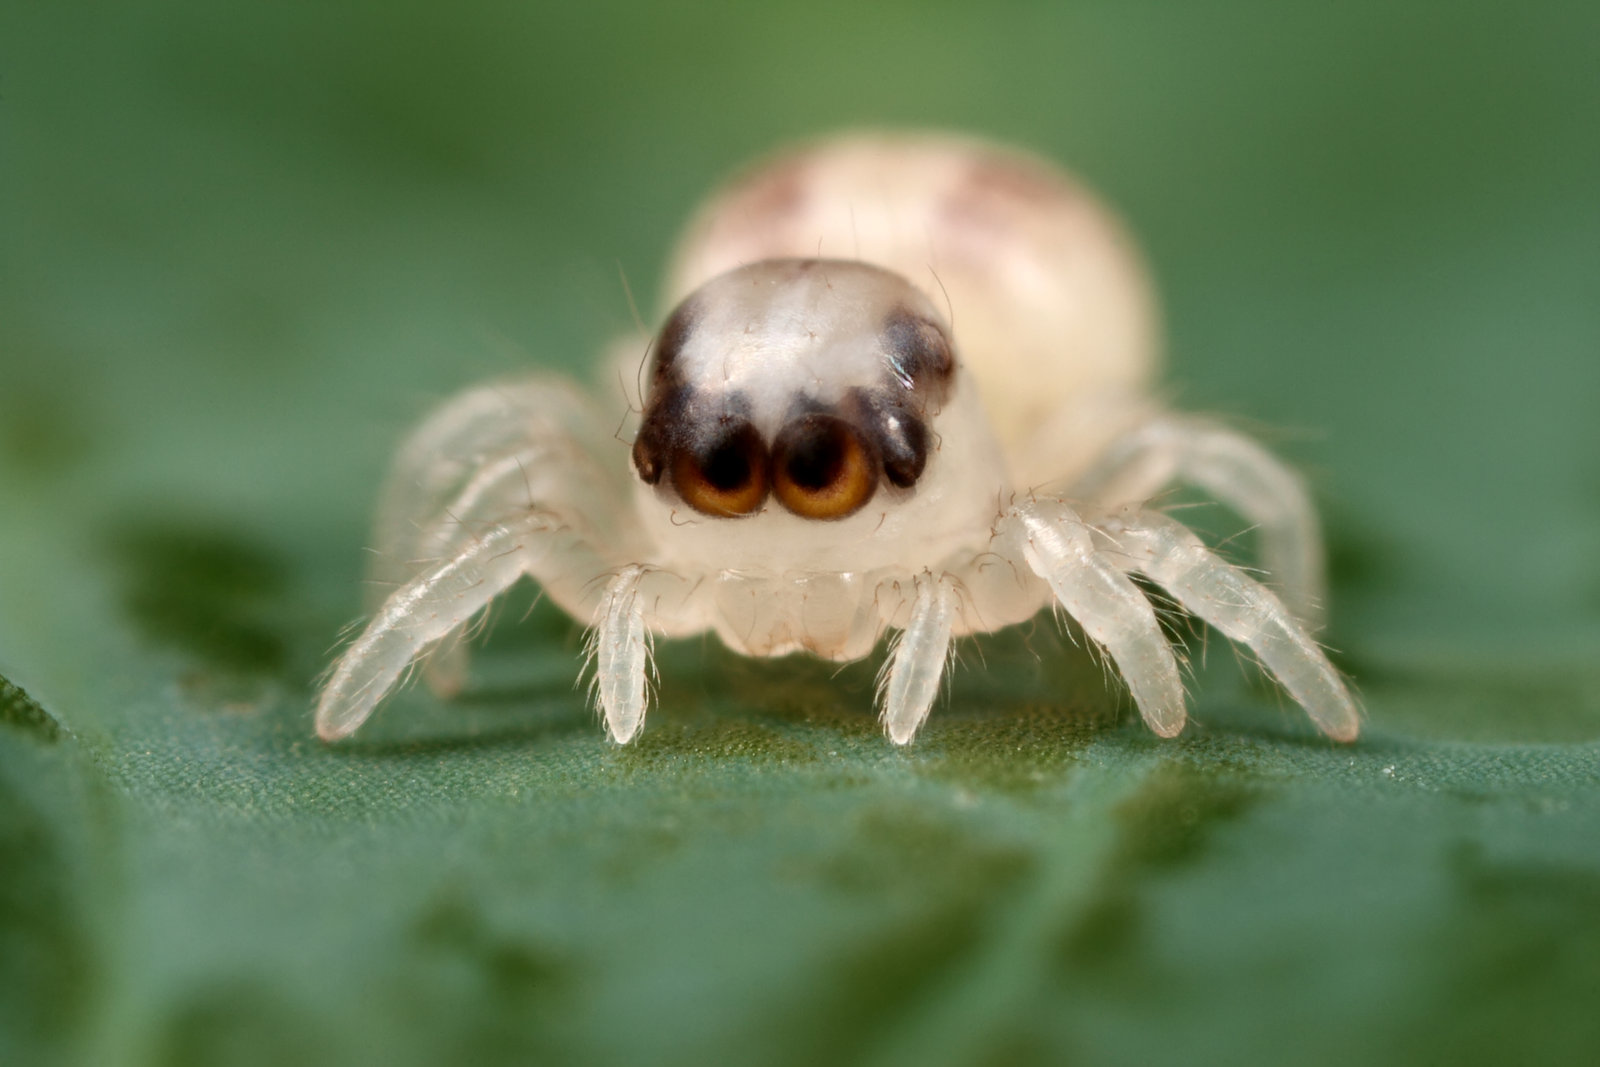 jumping_spider_just_hatched_by_macrojunk